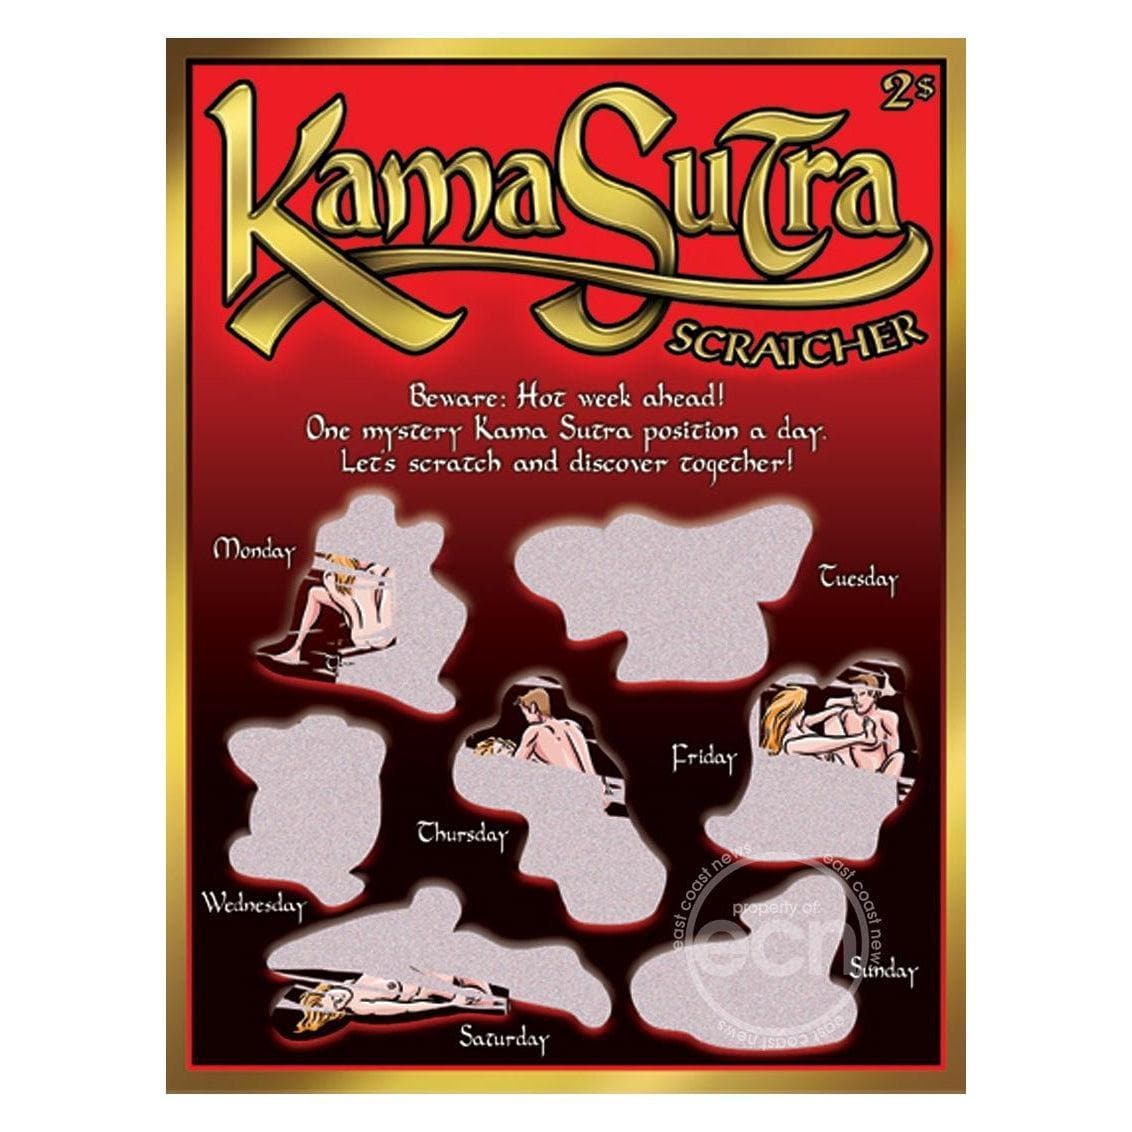 Kama Sutra Scratcher Game Ticket - Romantic Blessings